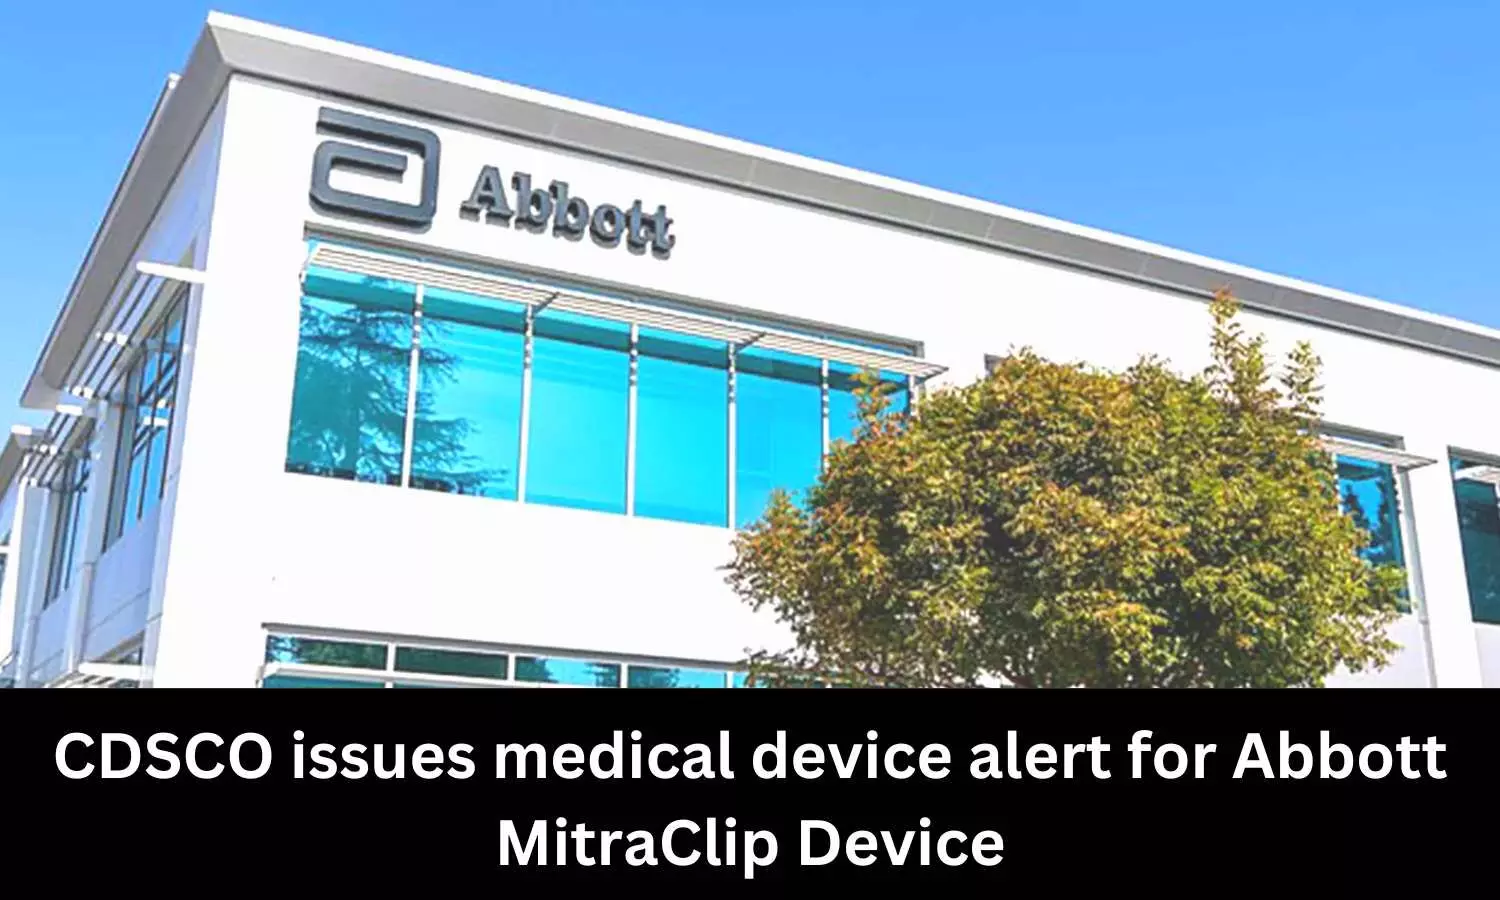 CDSCO issues medical device alert for Abbott MitraClip Device